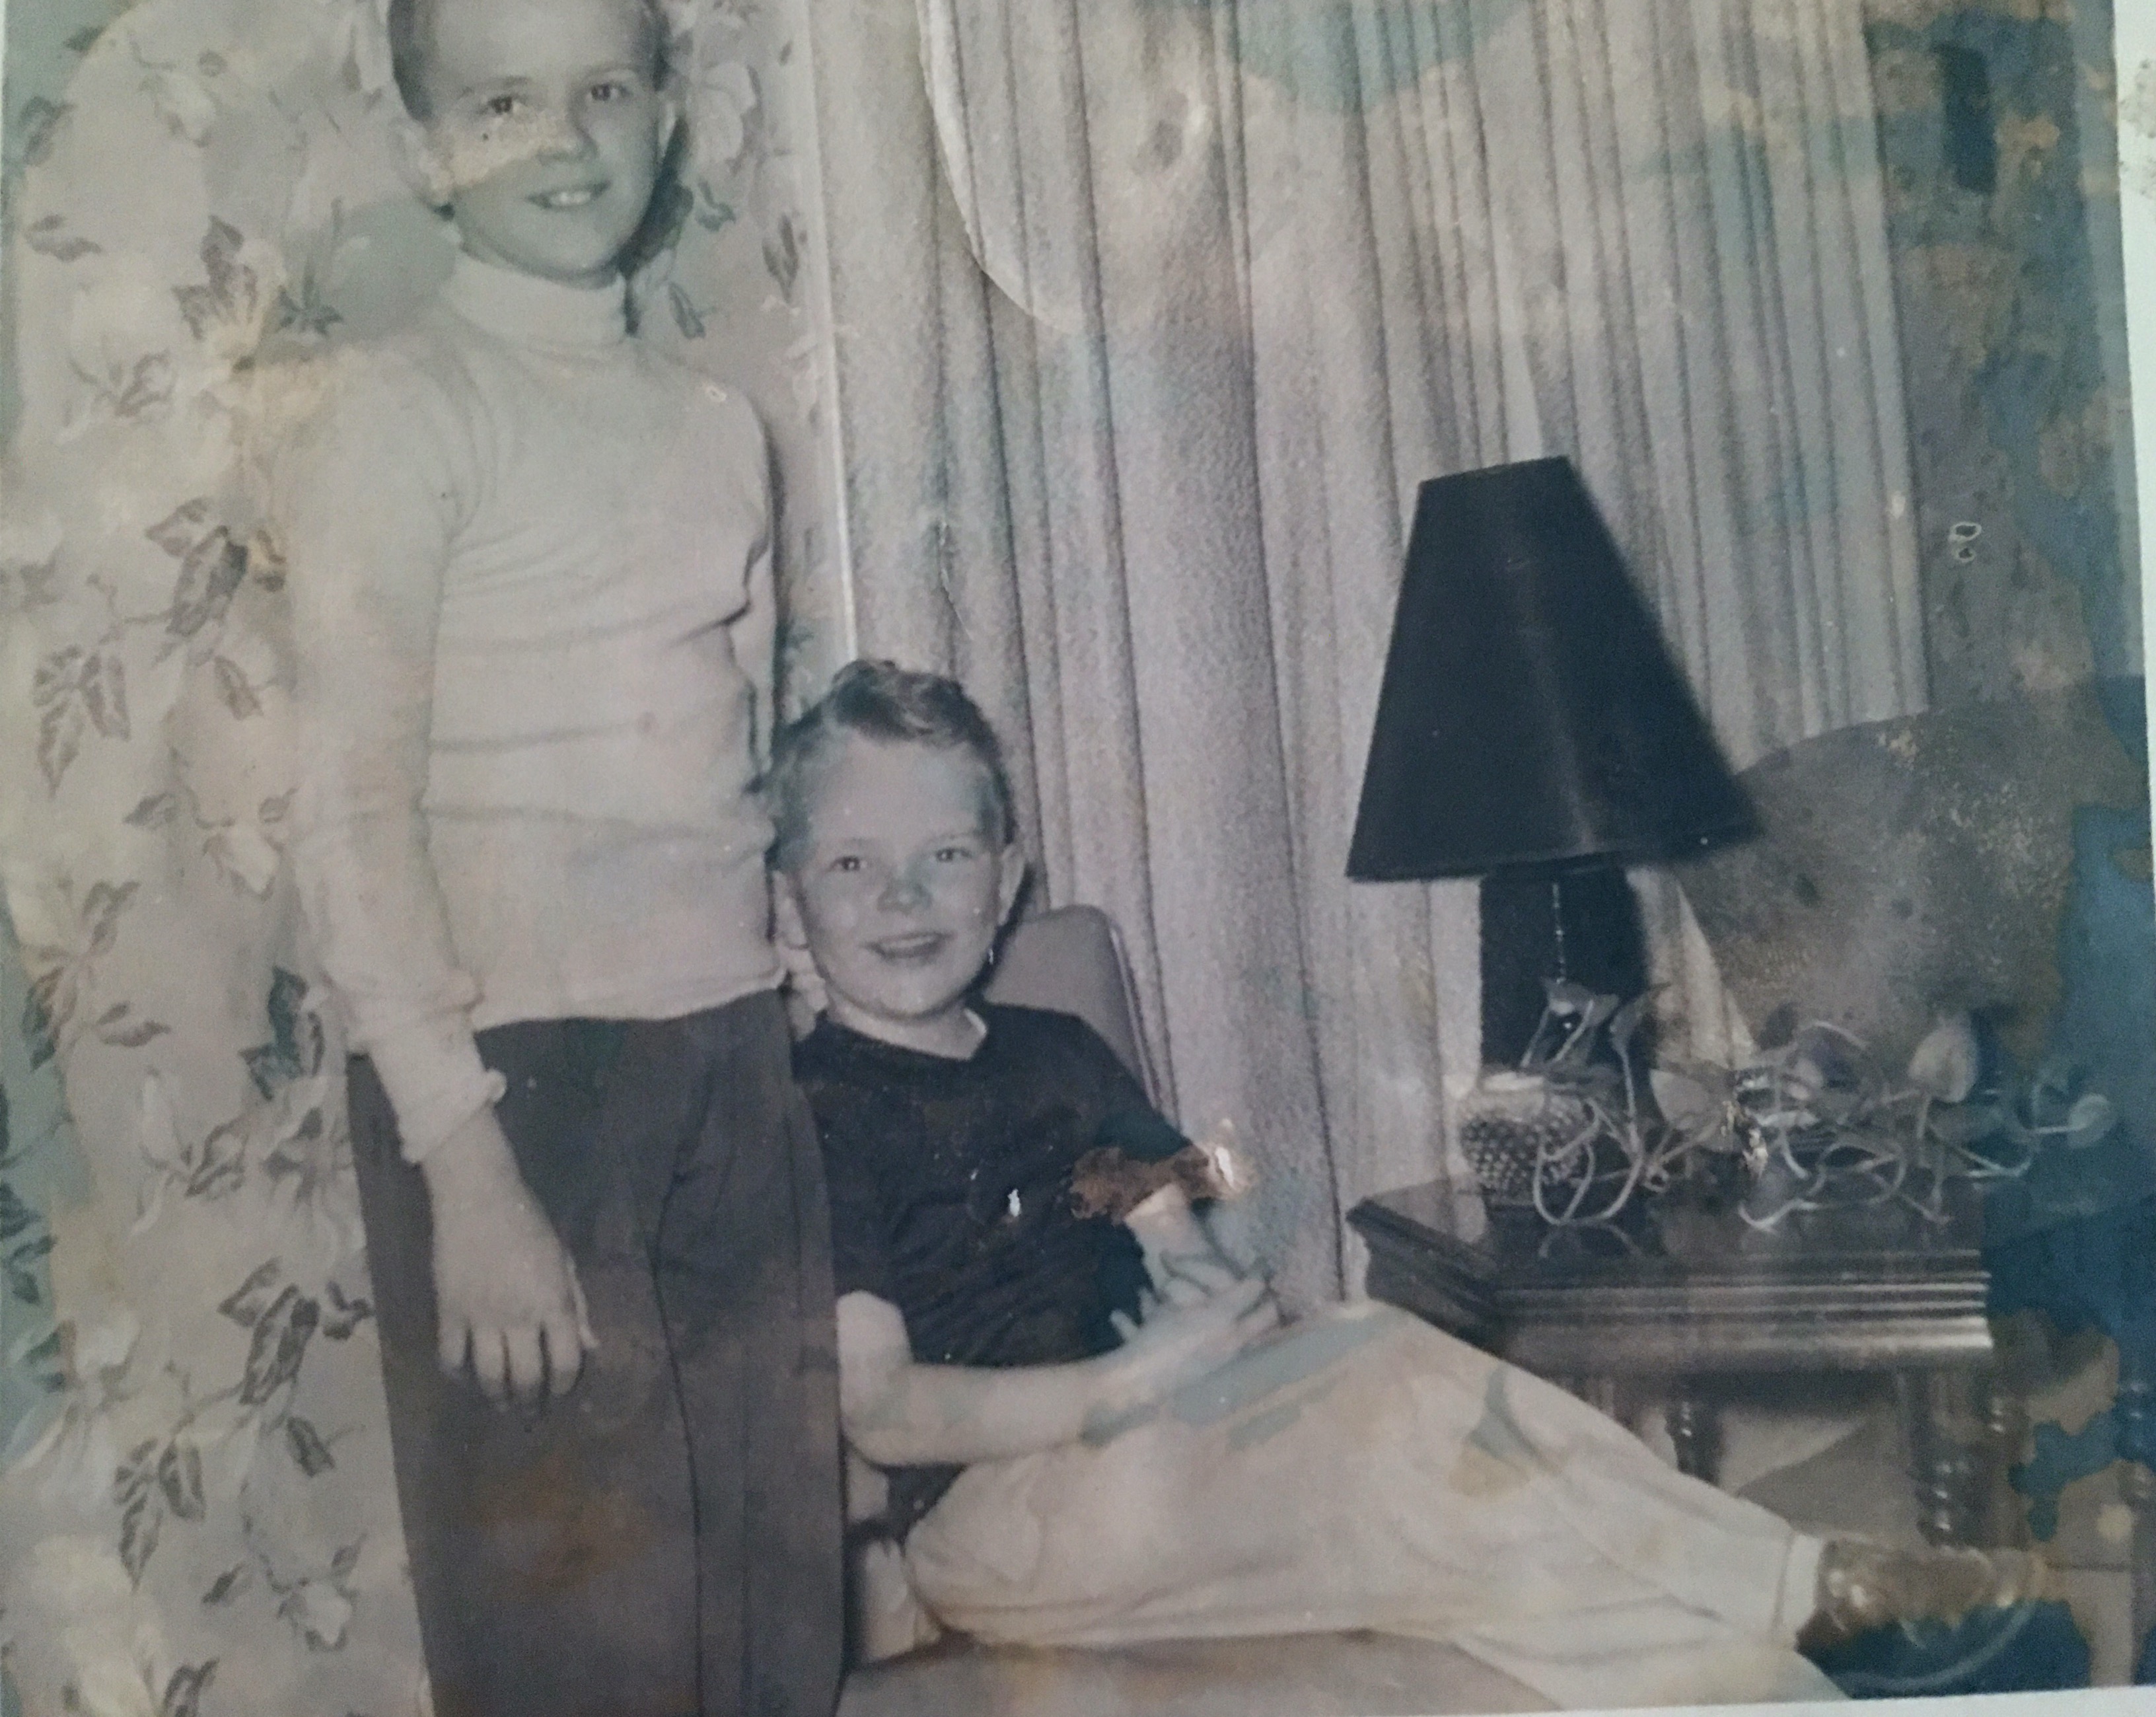 Brother and I, 1956